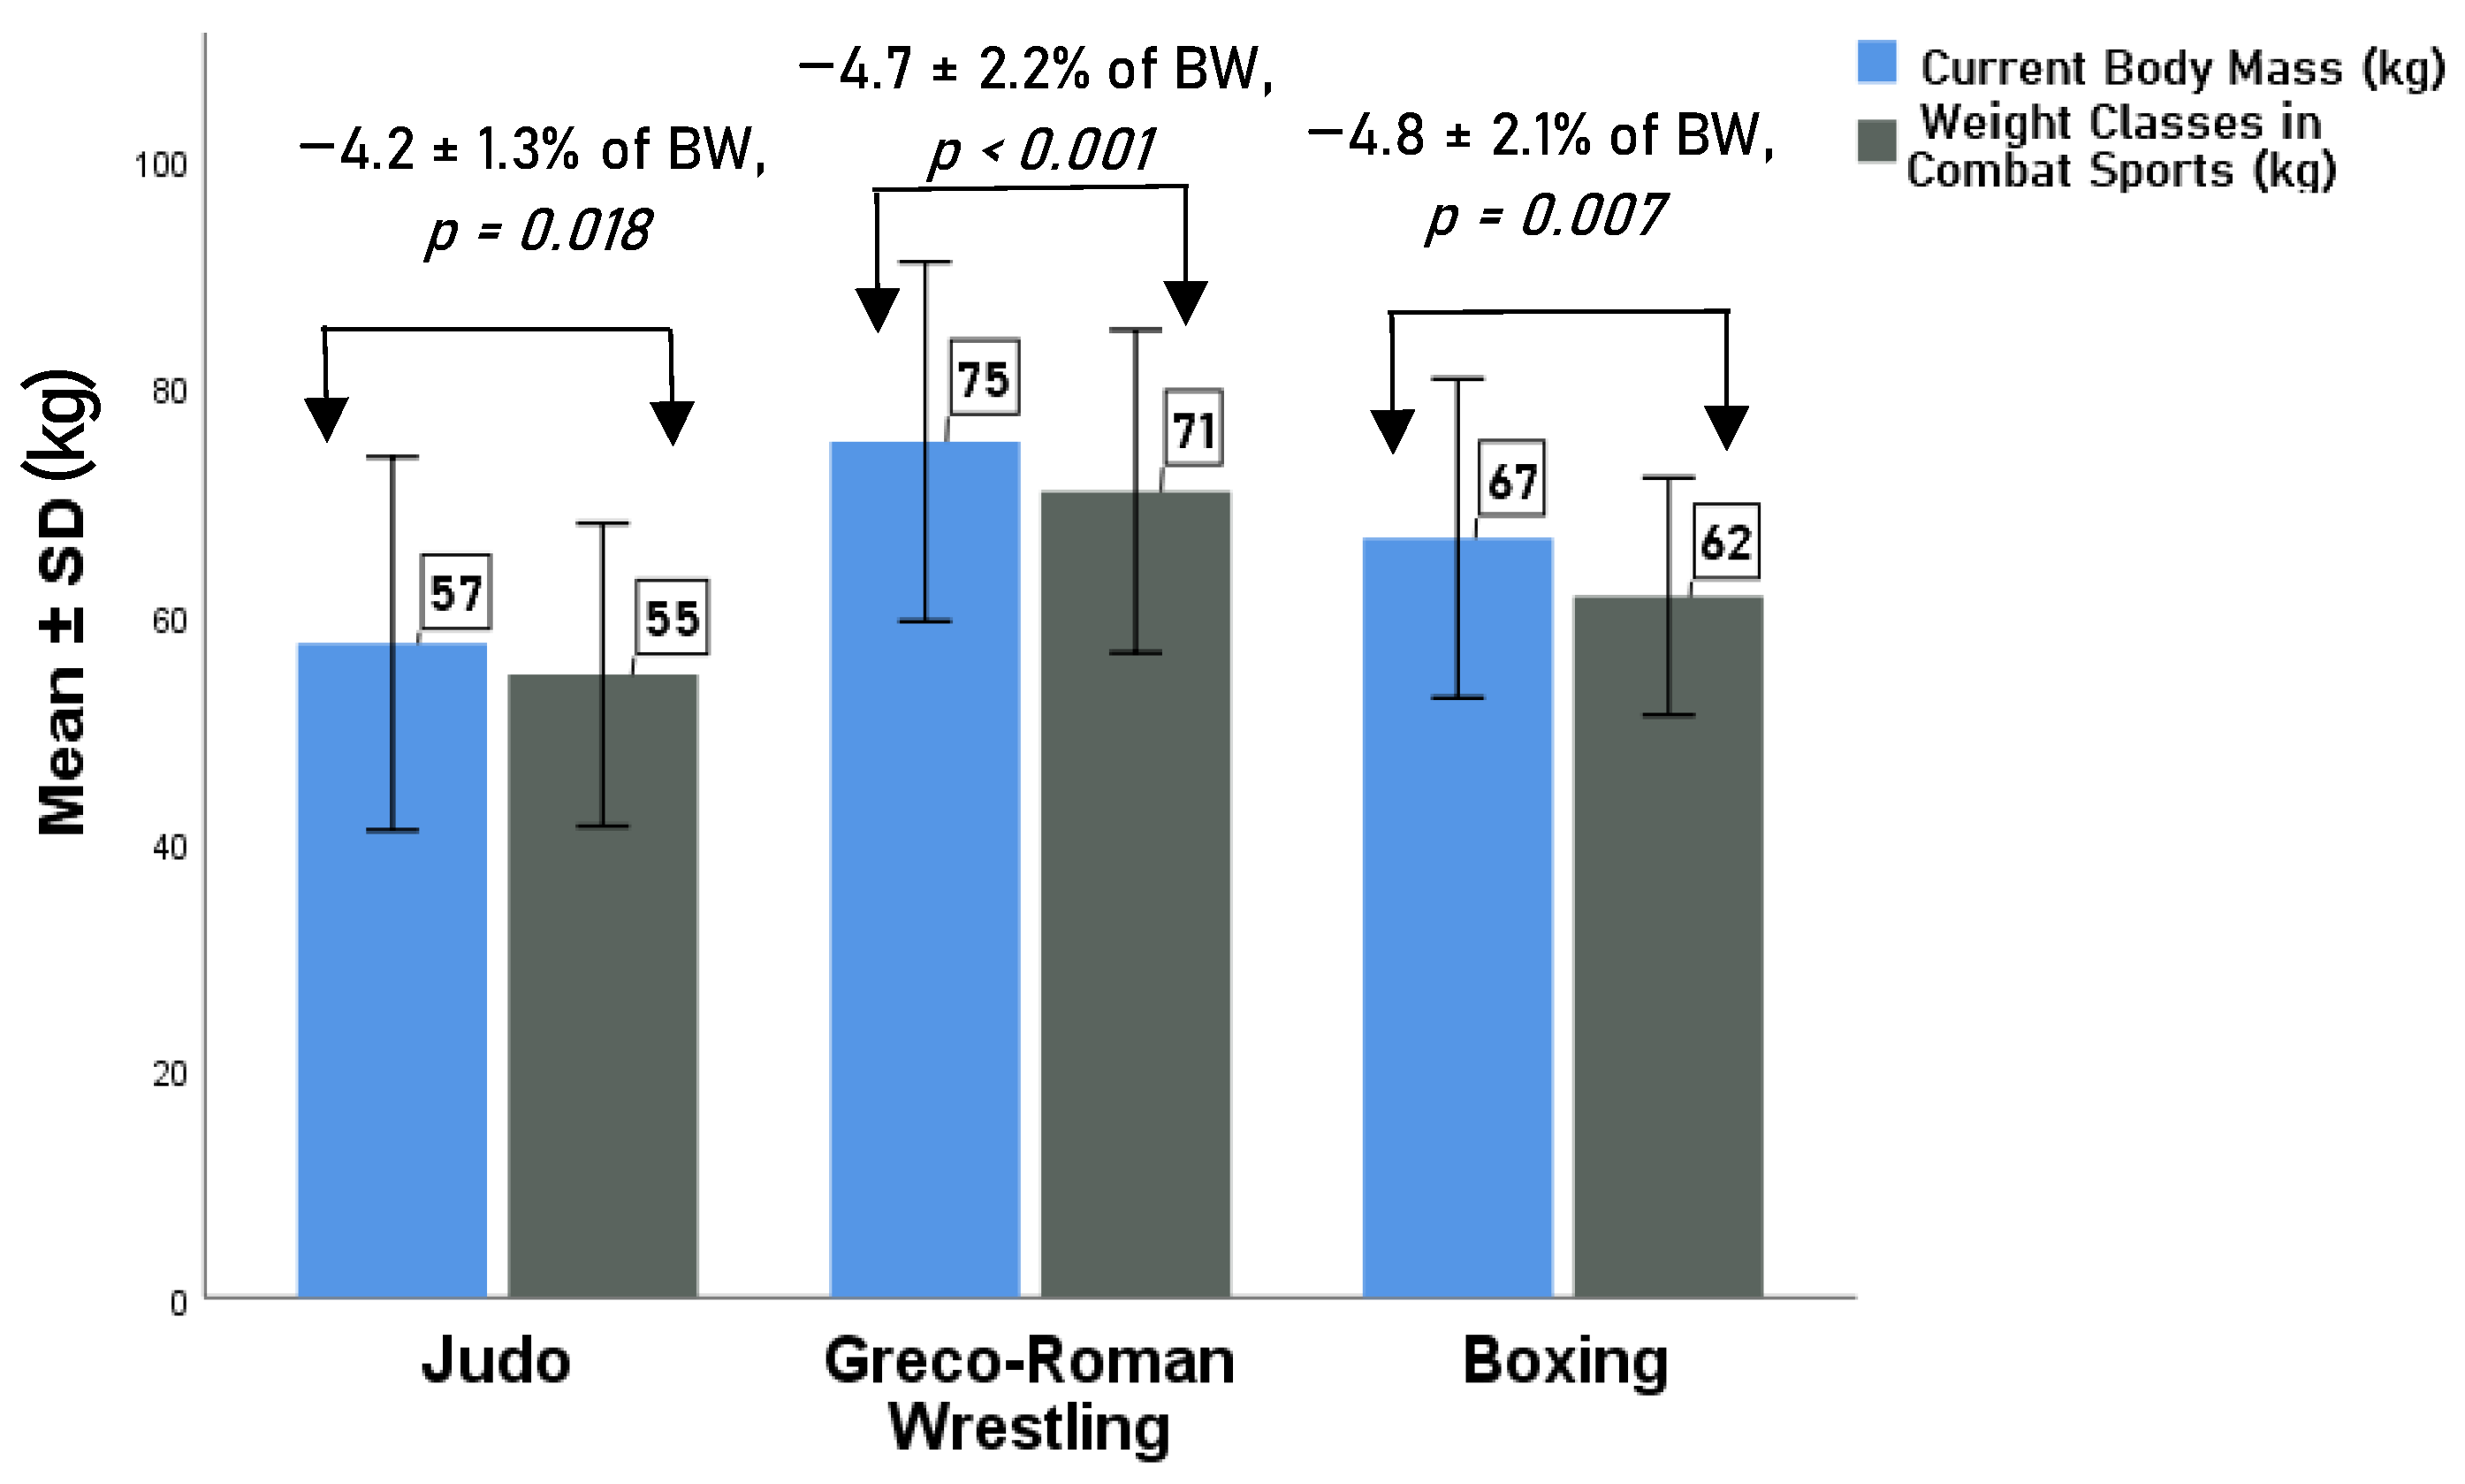 Healthcare Free Full-Text The Association between Rapid Weight Loss and Body Composition in Elite Combat Sports Athletes picture pic